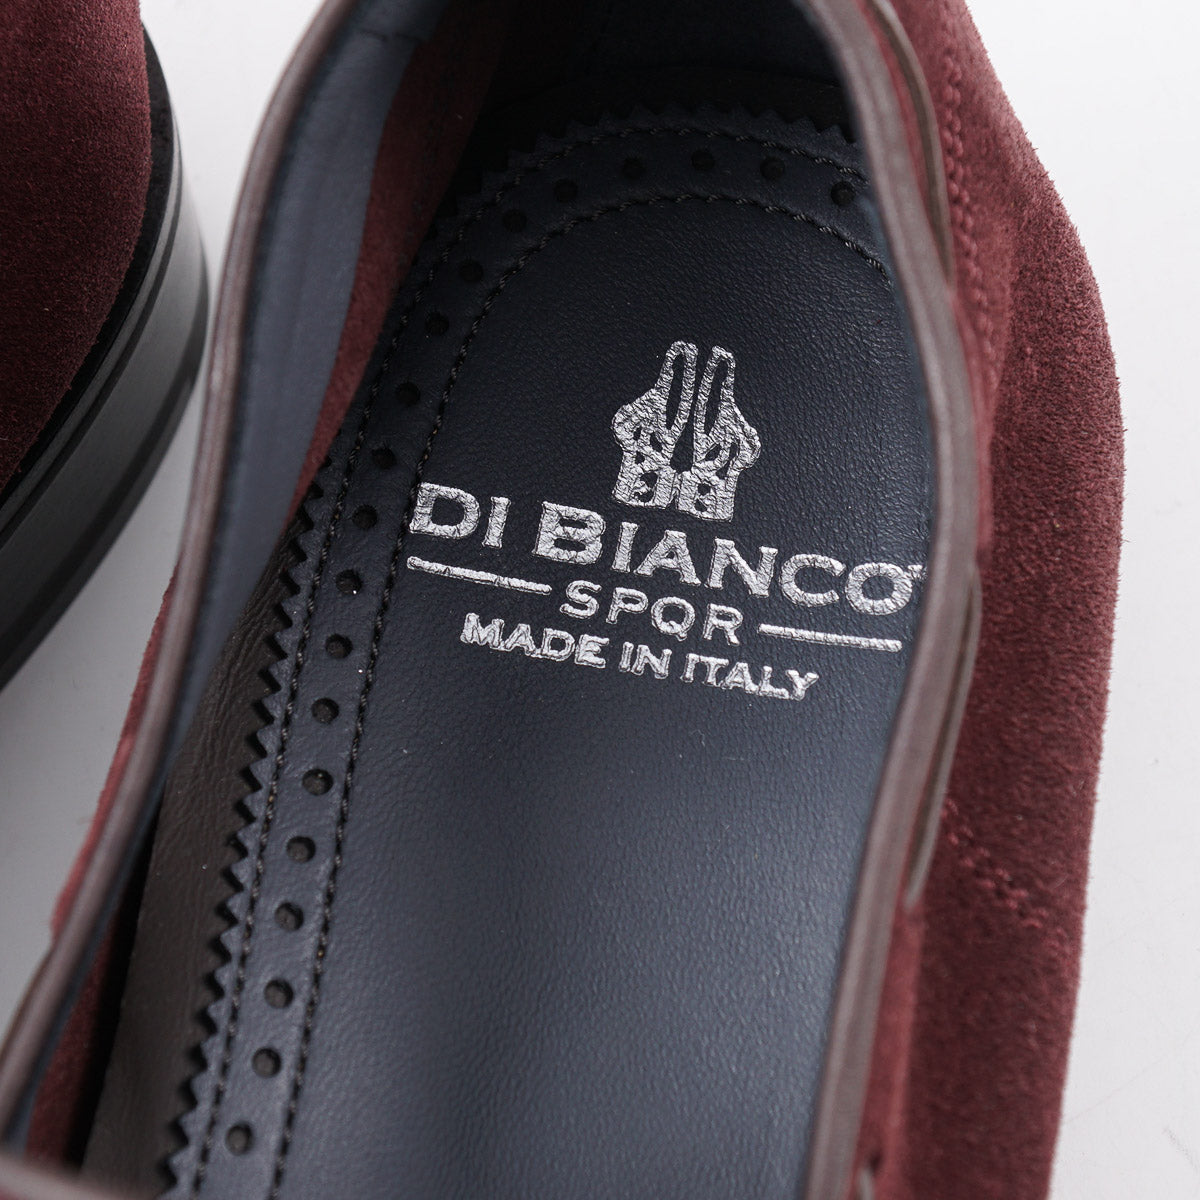 di Bianco 'Napoli' Unlined Suede Loafer - Top Shelf Apparel